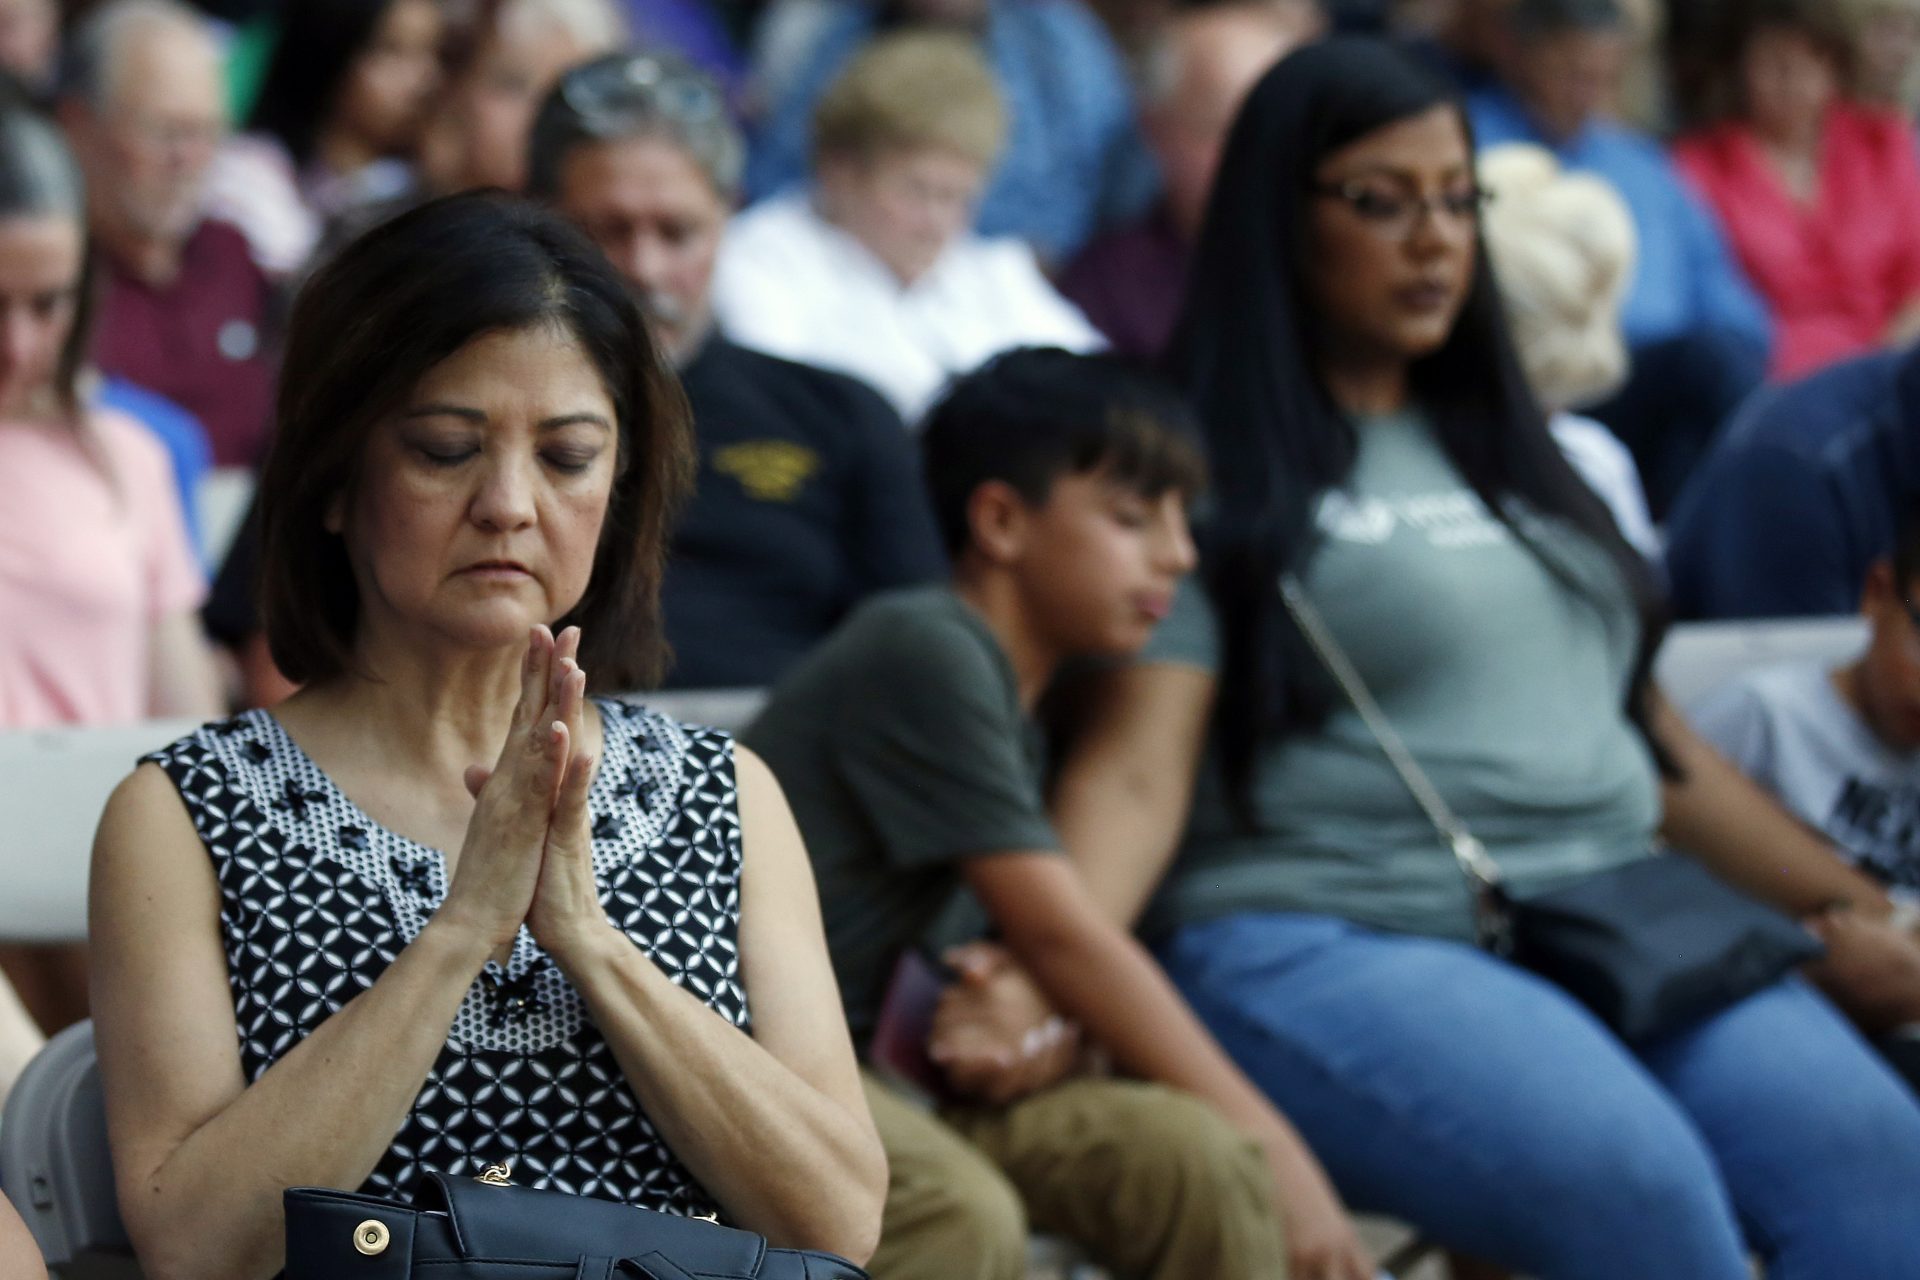 Mira Marquez, of Midland, Texas, folds her hands in prayer during a prayer service, Sunday, Sept. 1, 2019, in Odessa, Texas, for the victims of a shooting spree the day before.